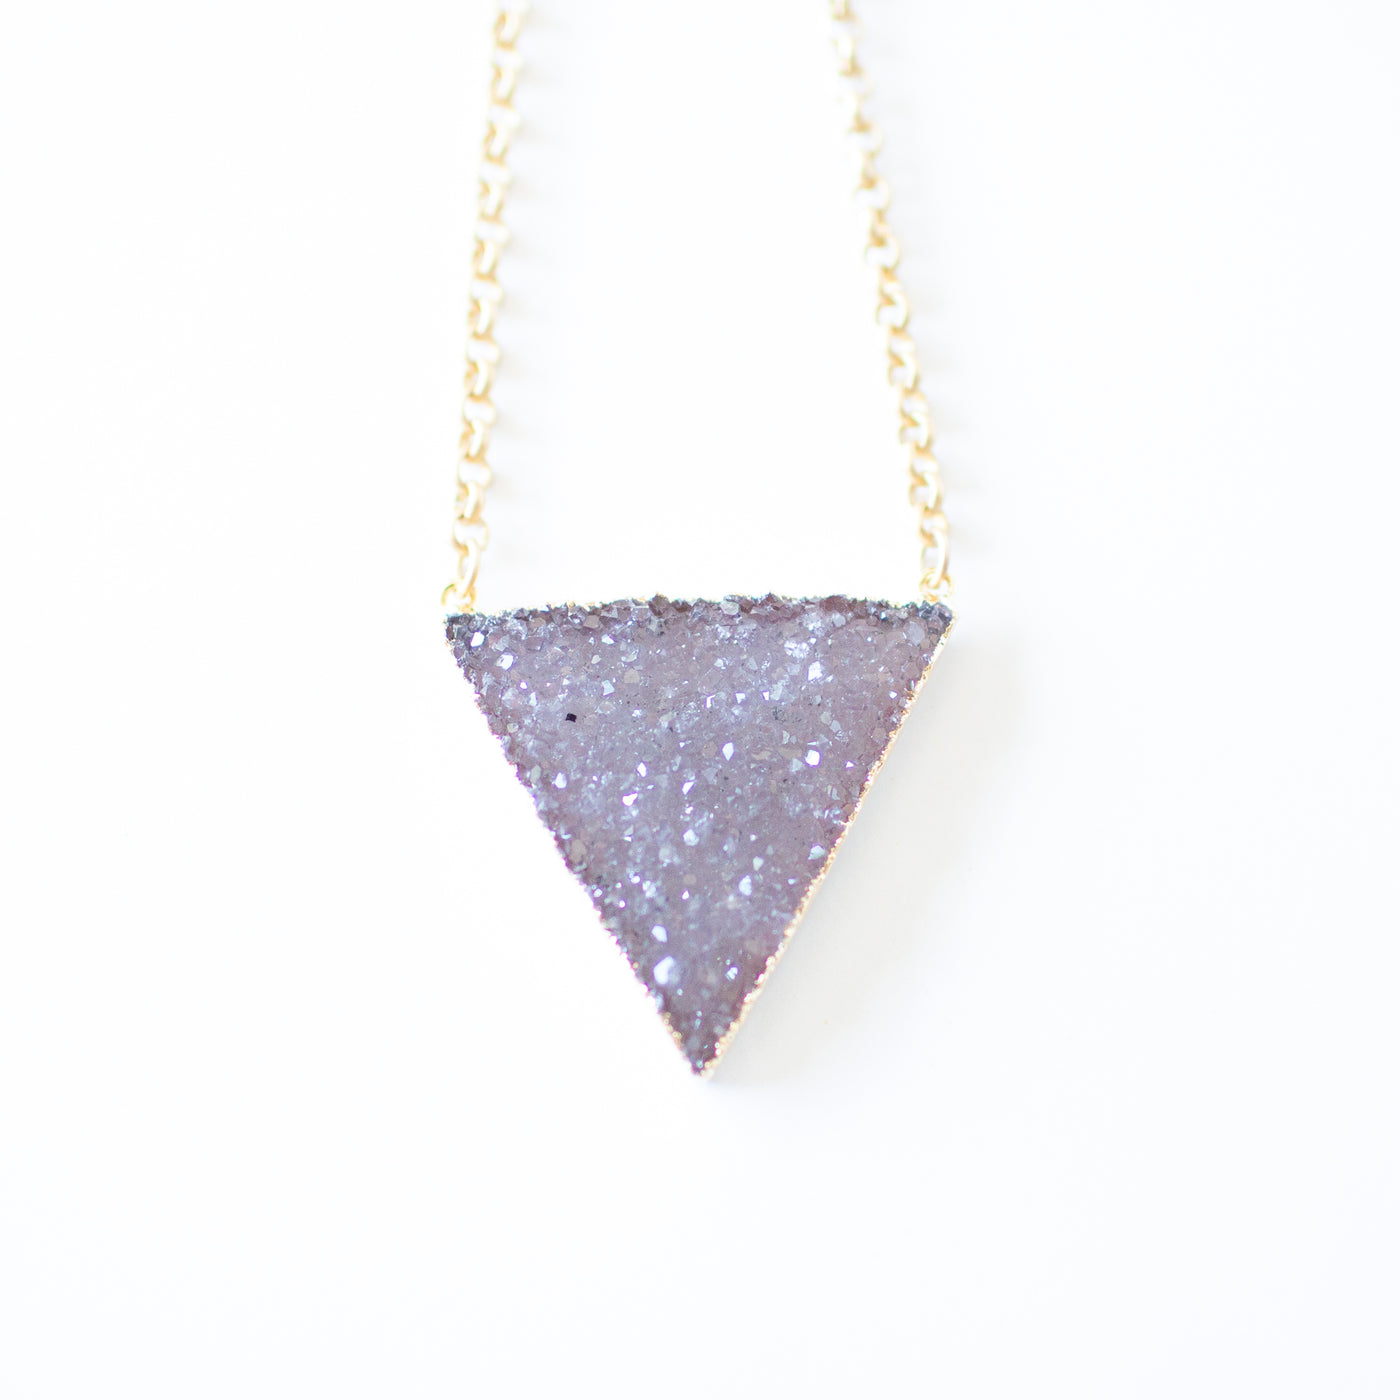 Triangle Druzy Quartz Pendant Necklace by Karli Buxton - Corinne an Affordable Women's Clothing Boutique in the US USA